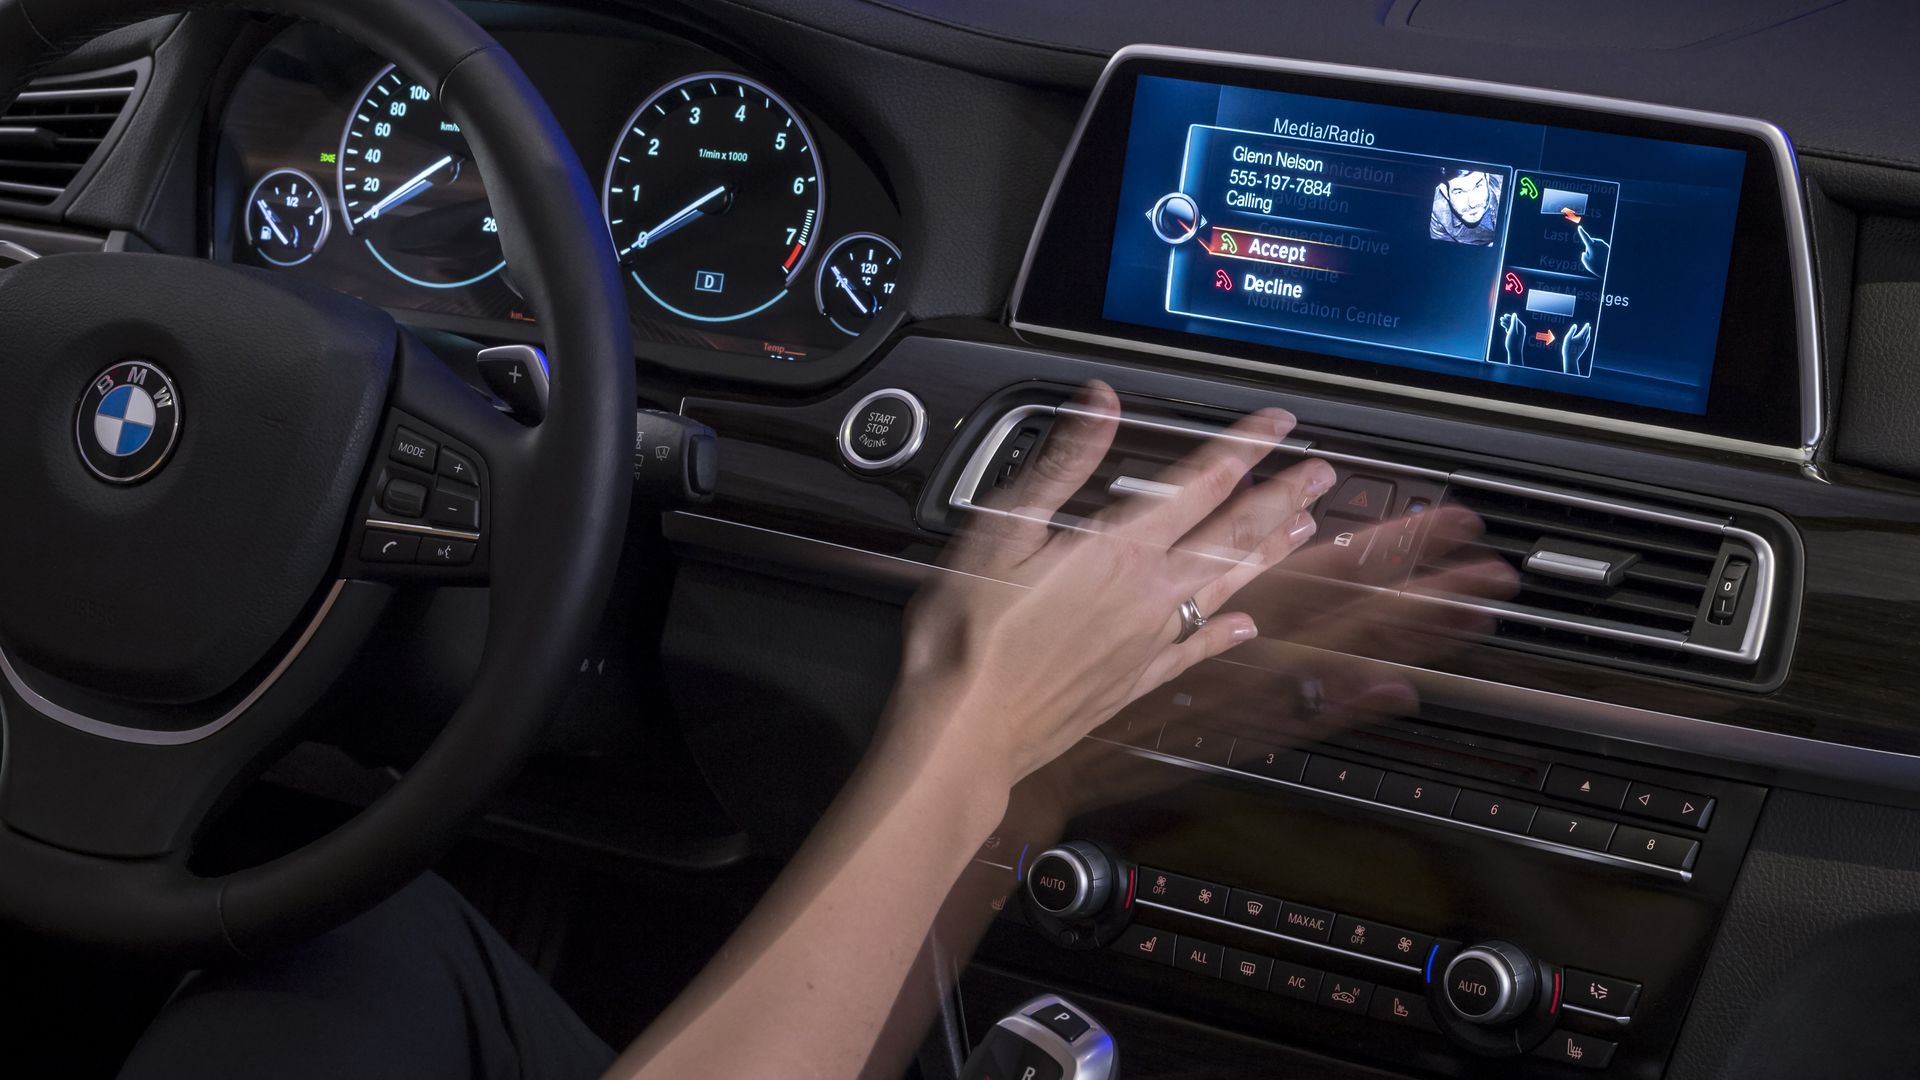 Image of a person's hand waving in front of a BMW car's infotainment system to answer a call. 